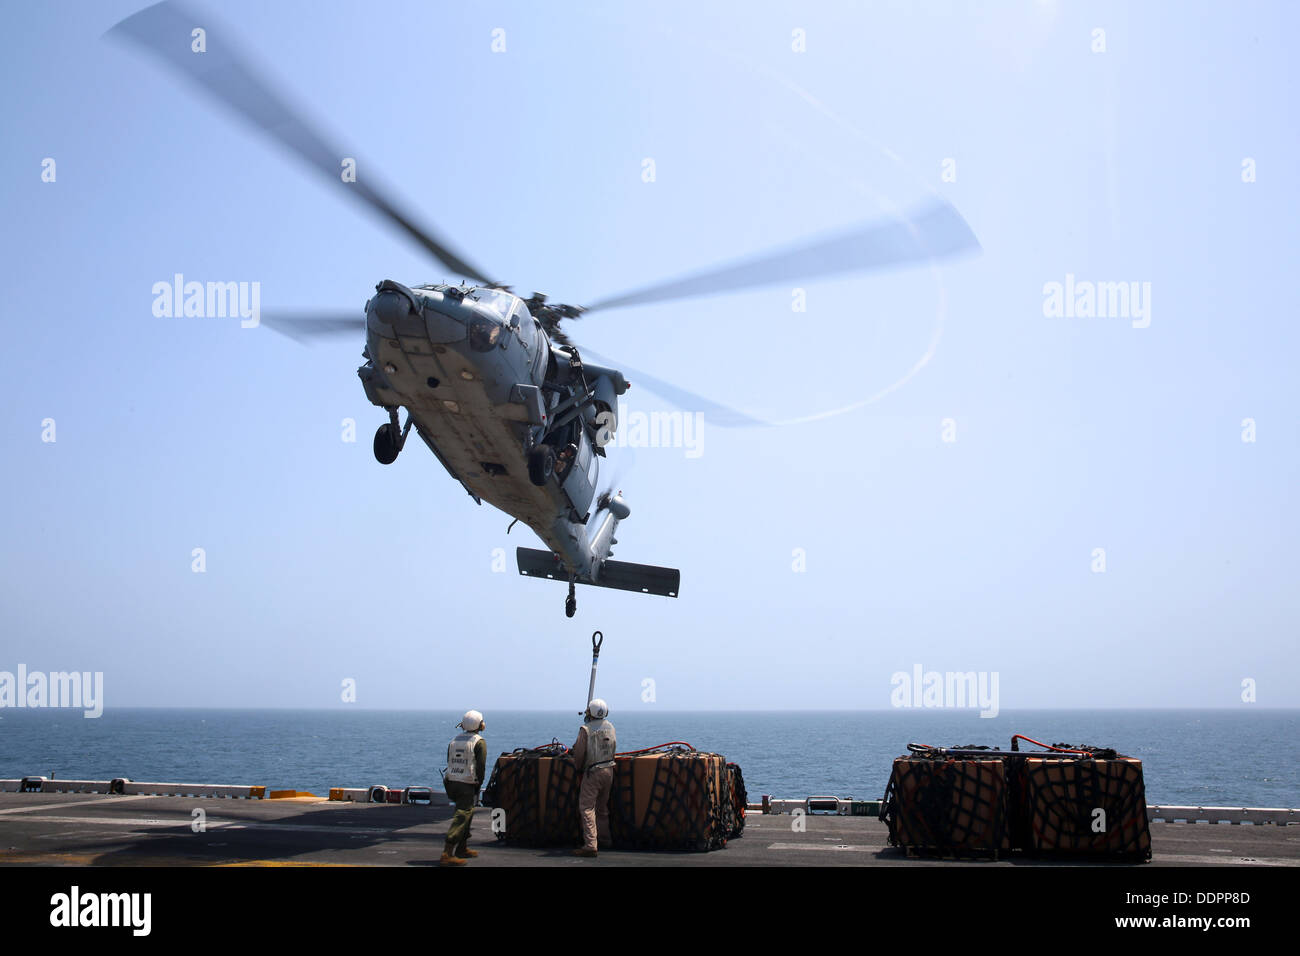 Marines from the 26th Marine Expeditionary Unit hook cargo to an MH-60S Sea Hawk helicopter aboard the amphibious assault ship USS Kearsarge (LHD 3) during a replenishment at sea. Kearsarge is the flagship for the Kearsarge Amphibious Ready Group and, wit Stock Photo